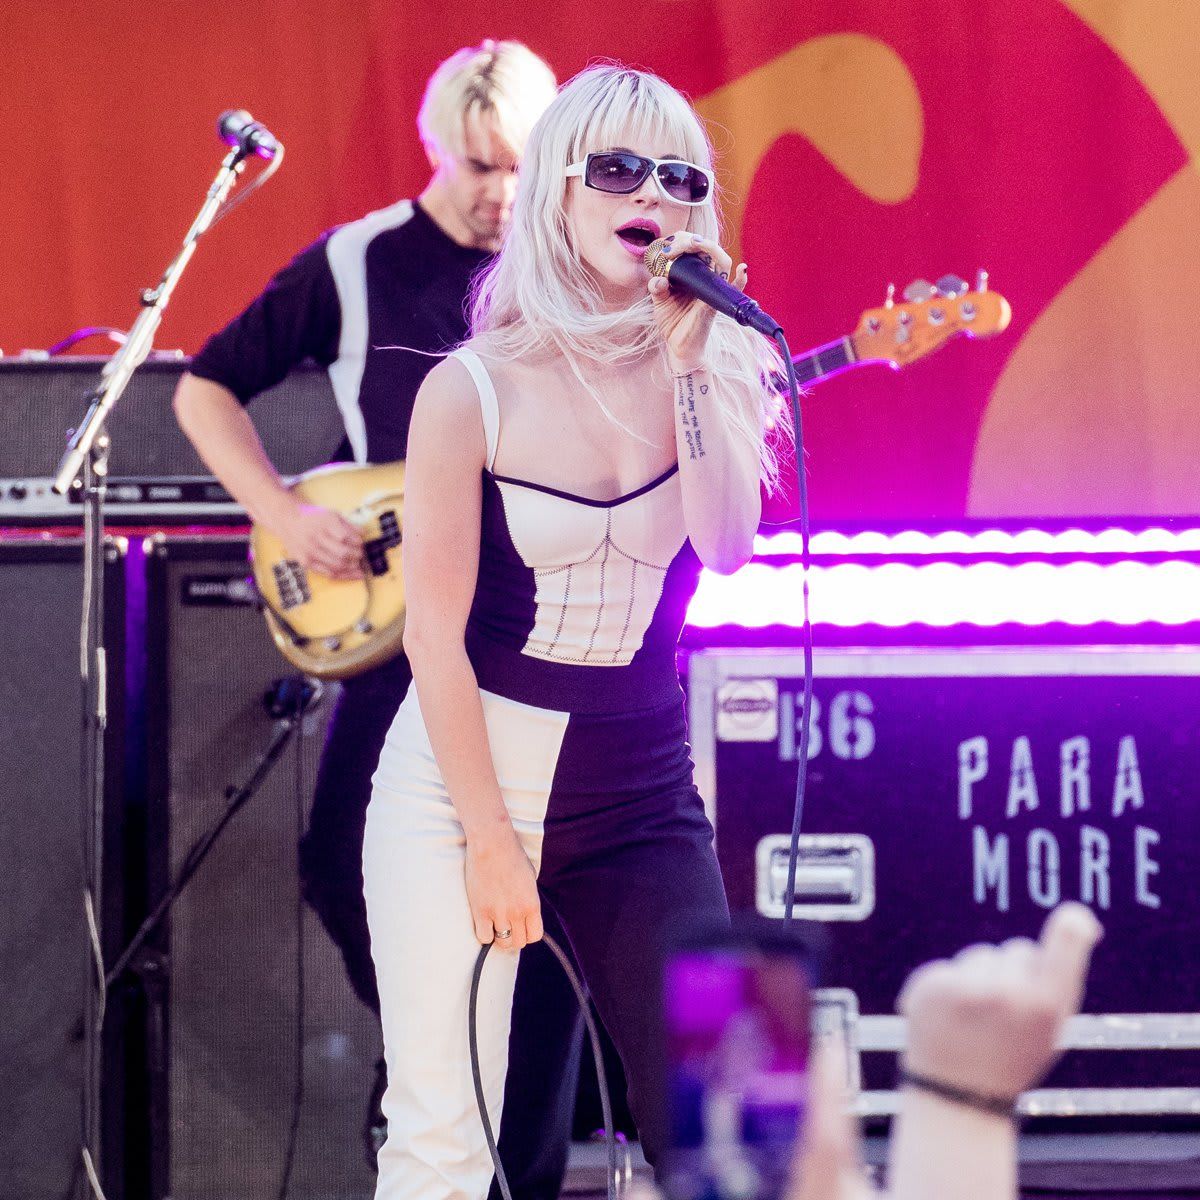 Paramore Performs On ABC's "Good Morning America"